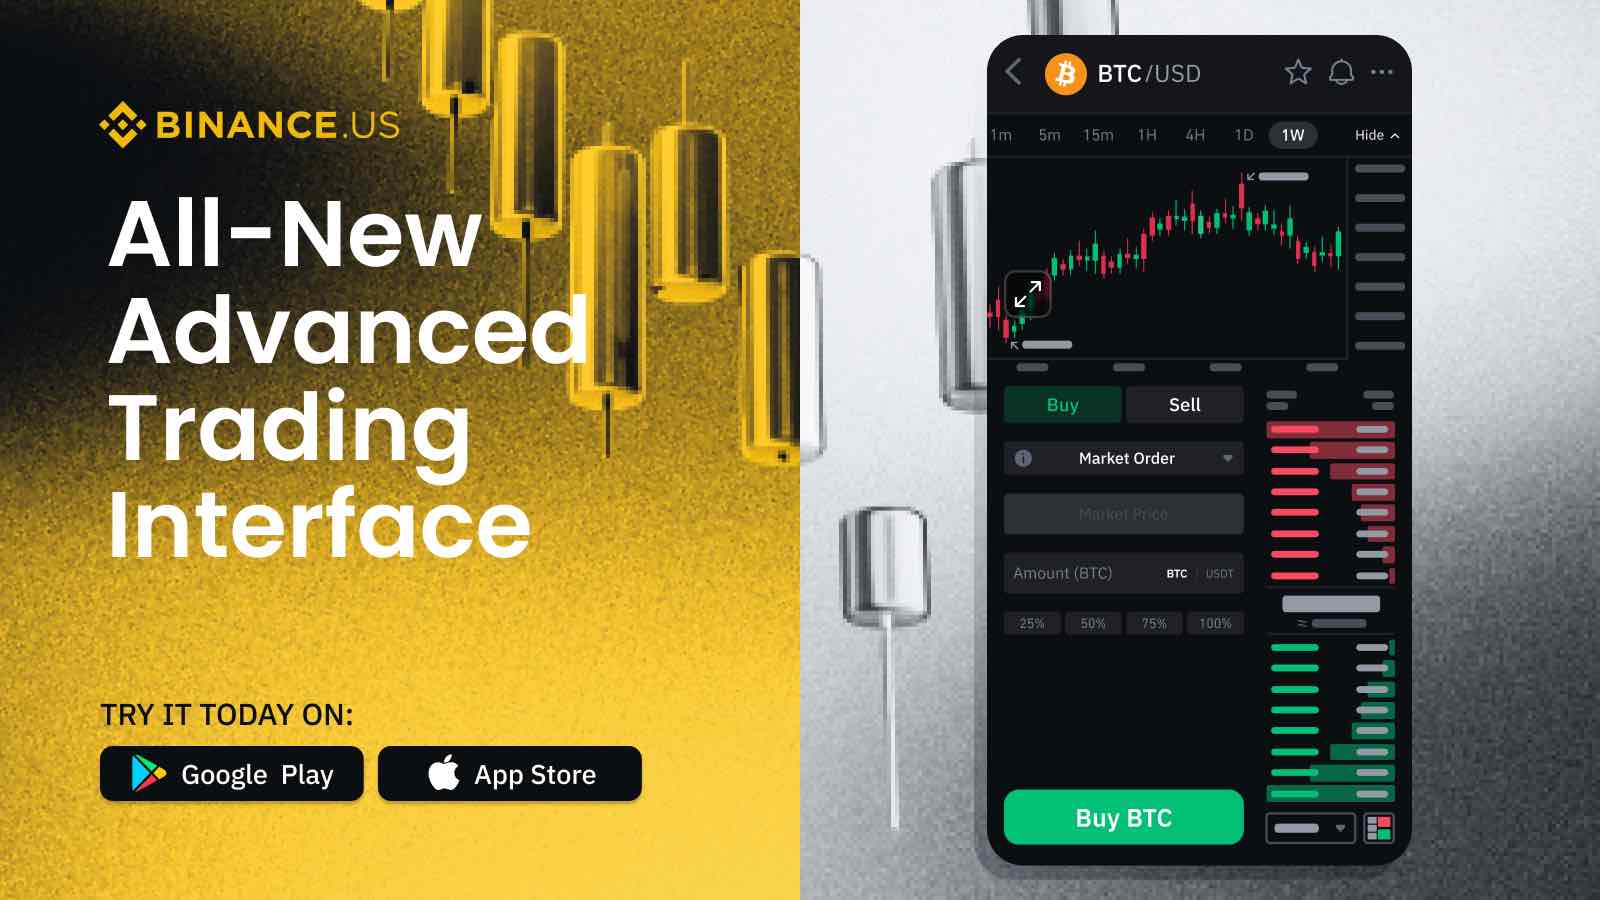 Introducing the All-New Advanced Trade Interface on Binance.US